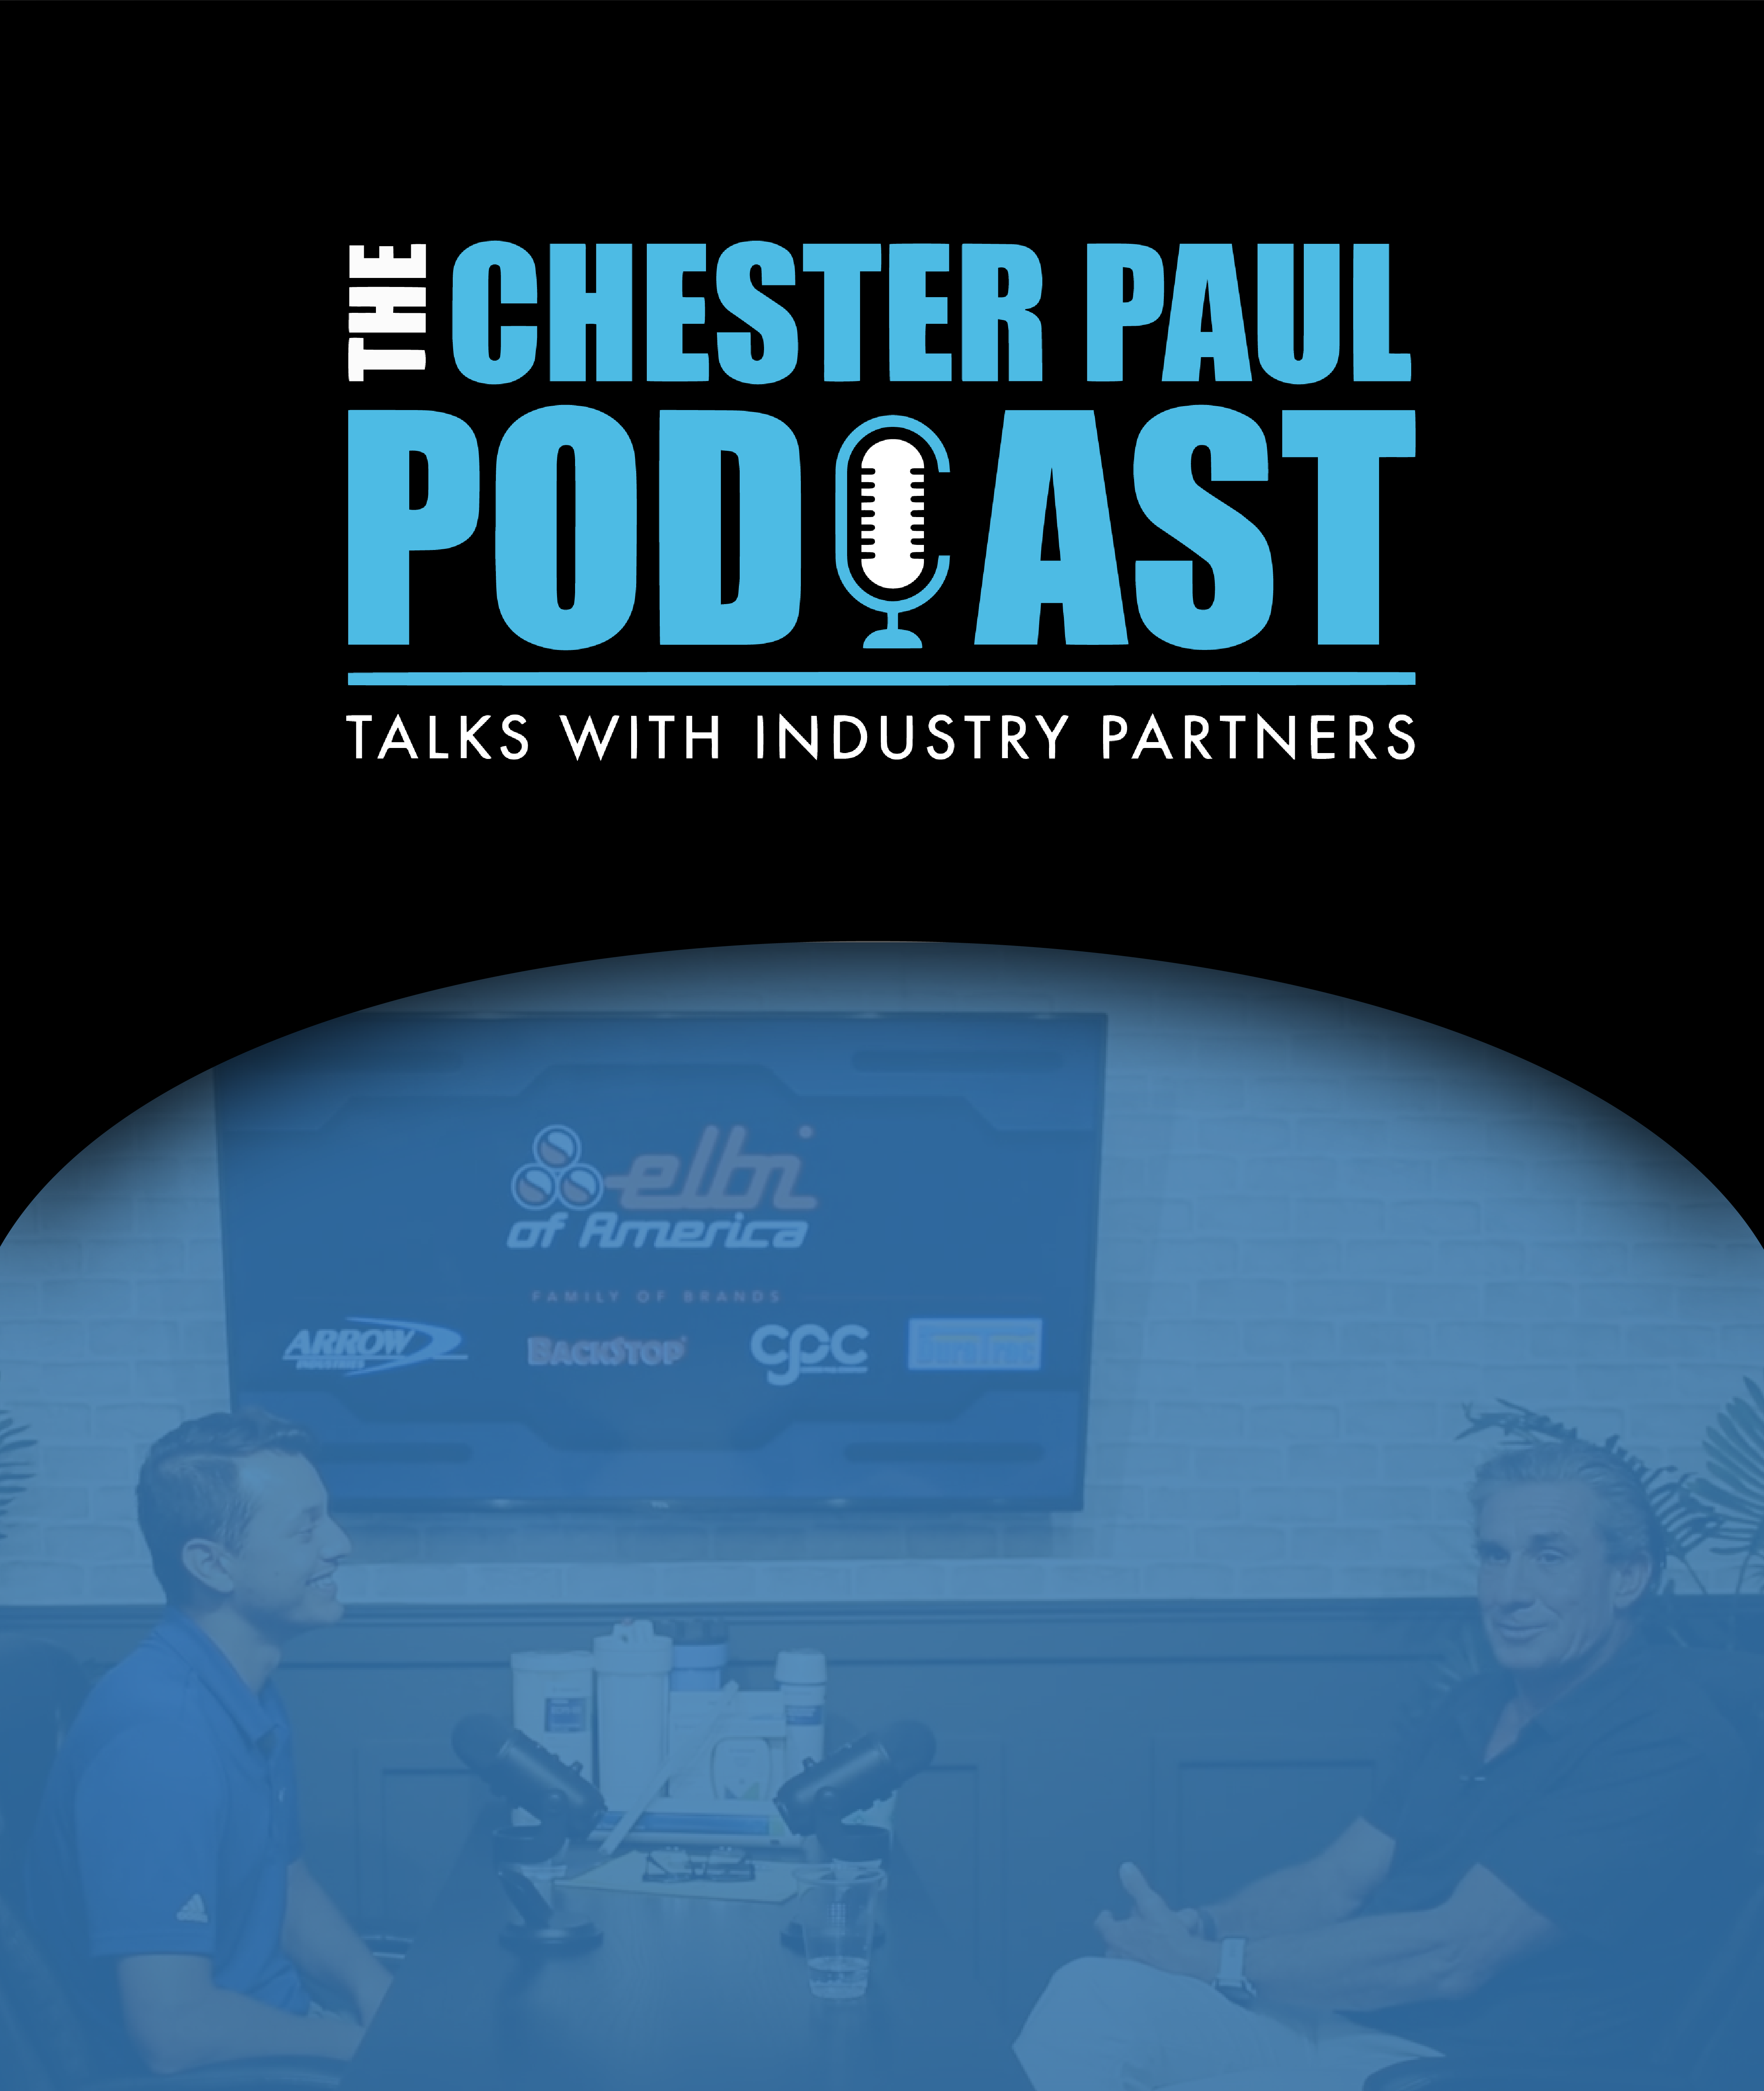 The Chester Paul Podcast. Talks with industry partners.